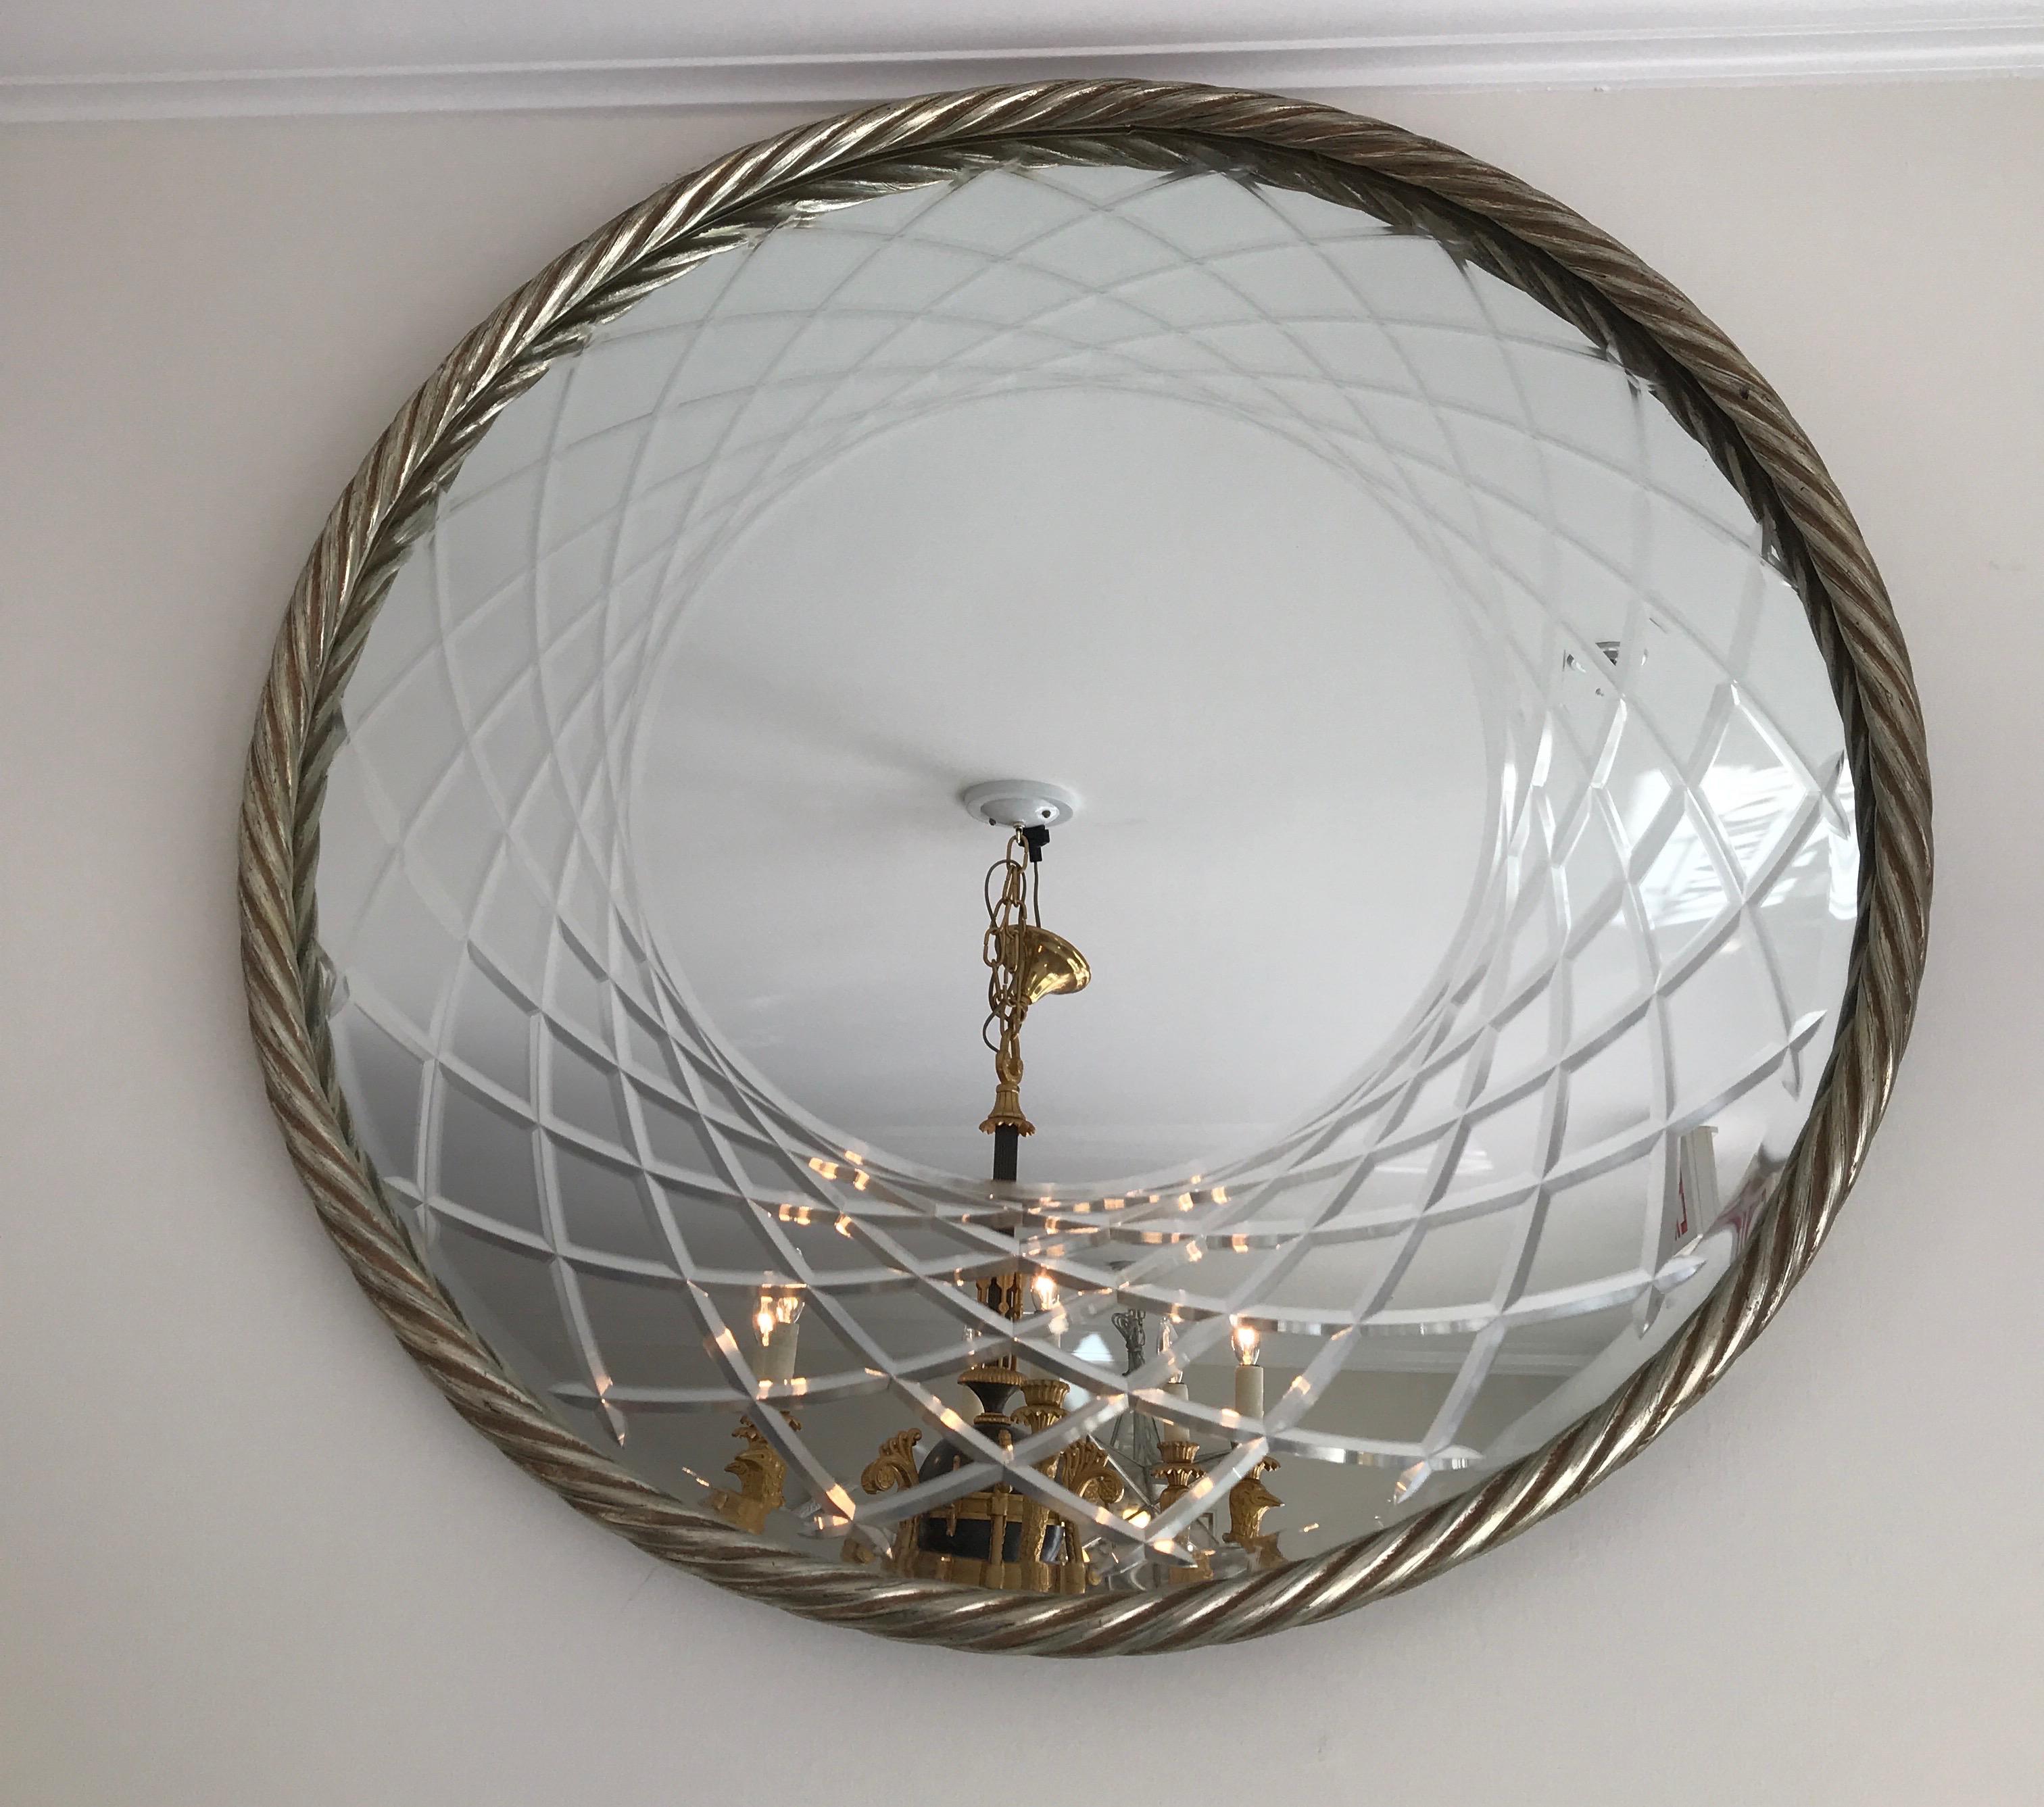 Silver gilded rope framed round mirror with a swirling design in border of mirror.